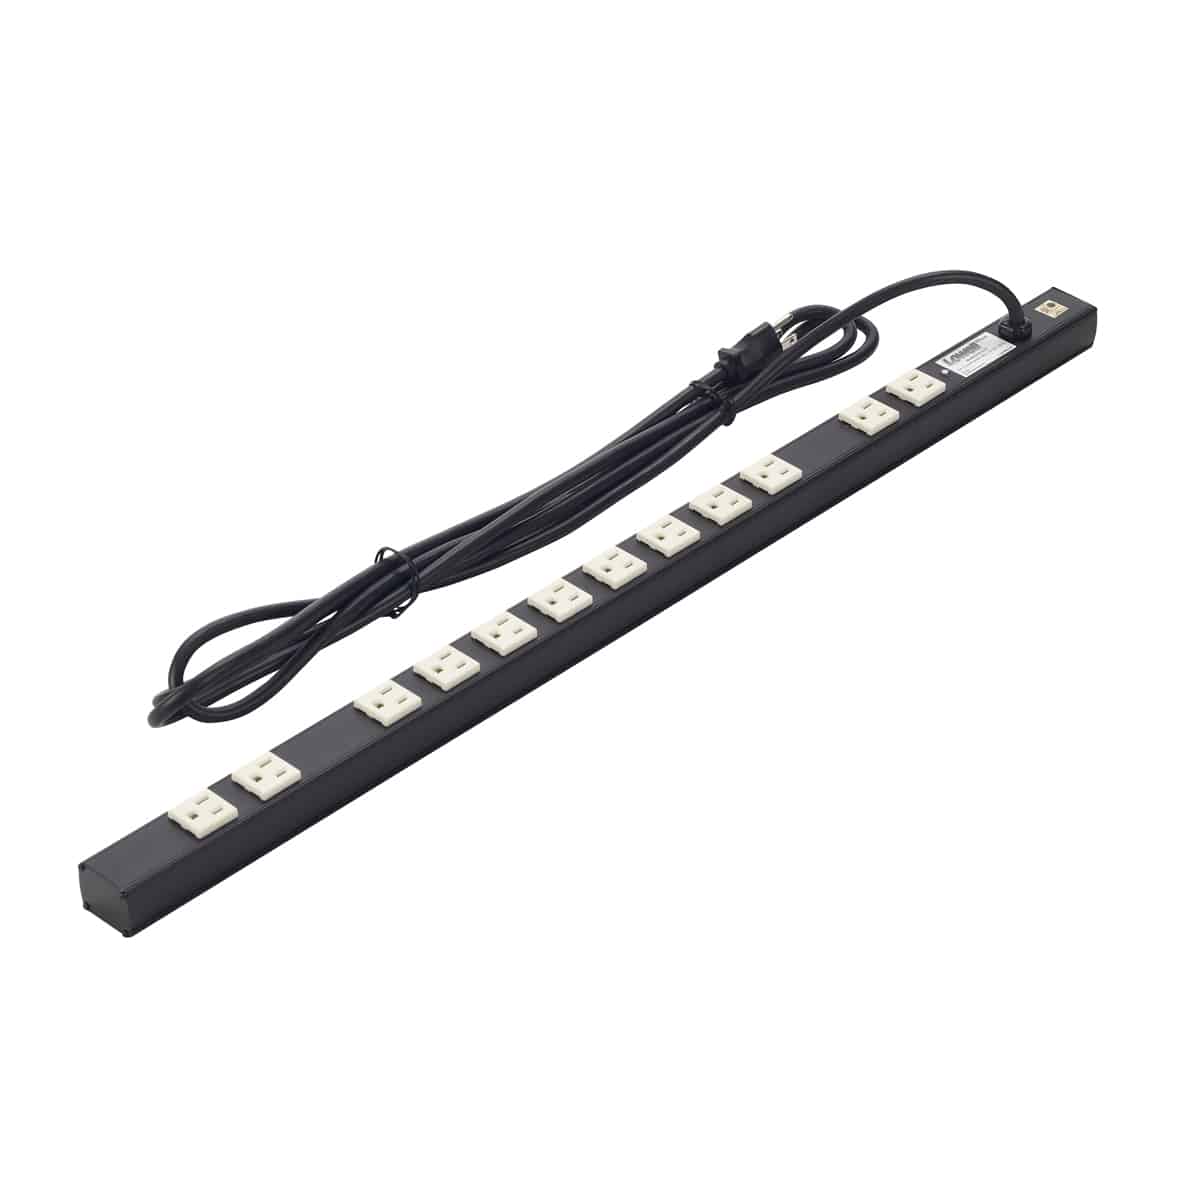 Lowell ACS-1512 Power Strip with Surge Suppression 15A, angled view